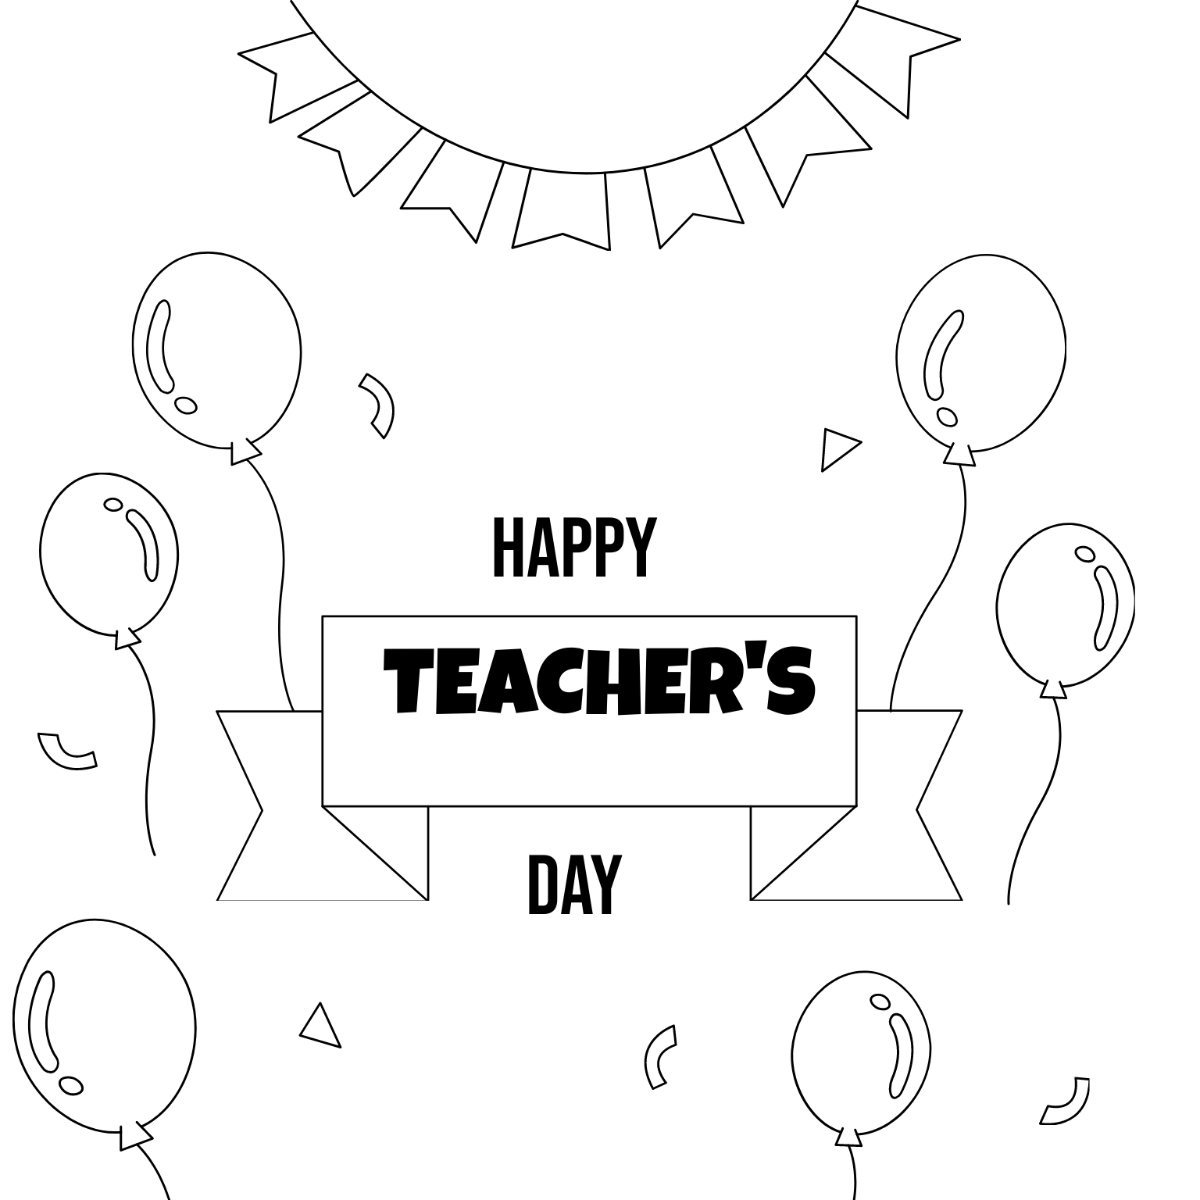 Happy Teacher's Day Celebration Drawing Template